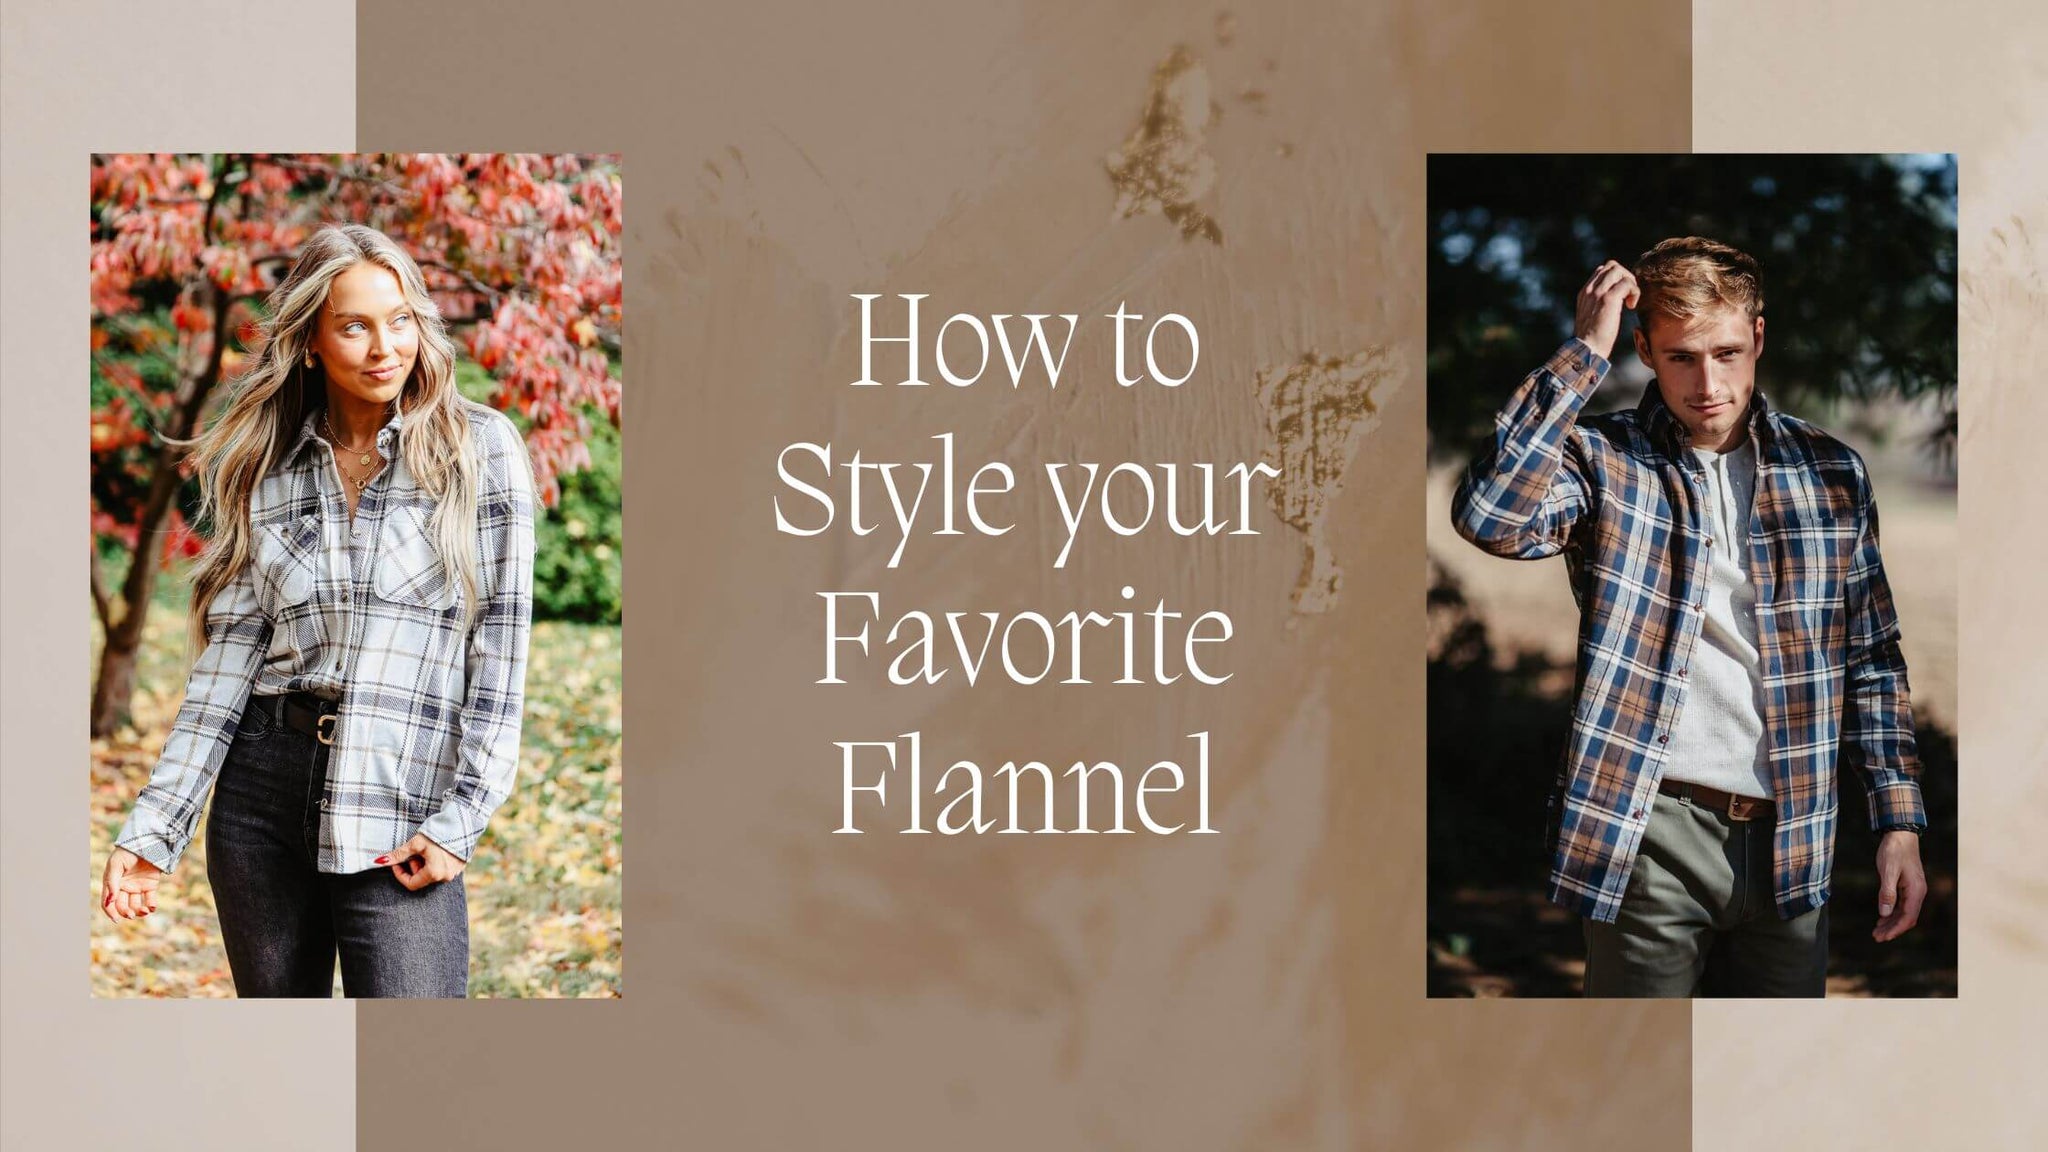 How to Style your Favorite Flannel